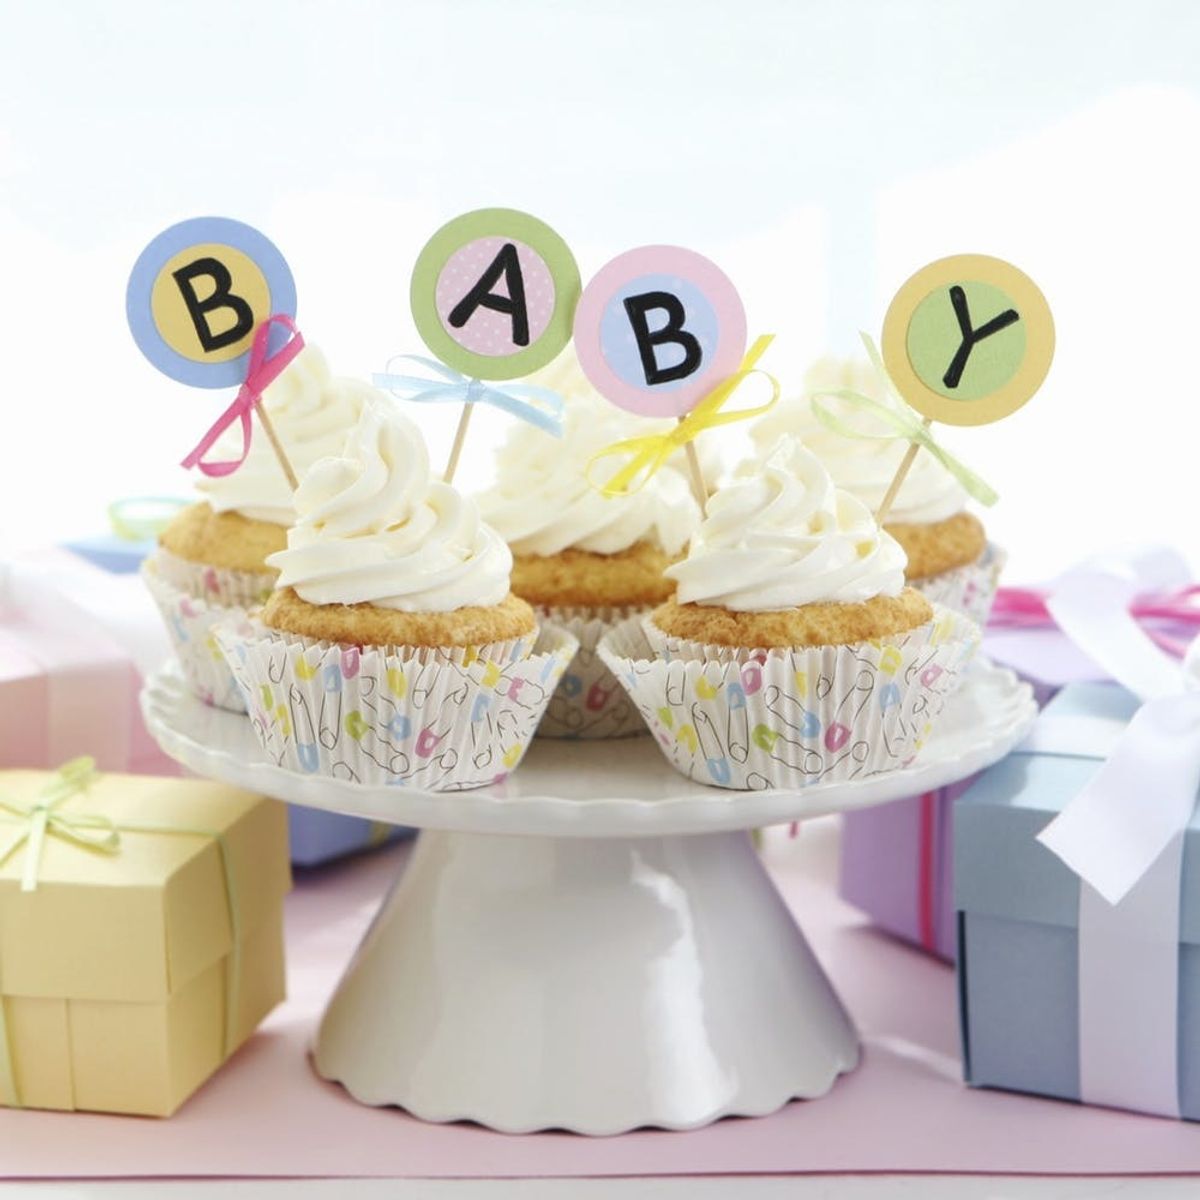 7 Adorable Baby Gender Reveal Ideas You’ll Want to Try